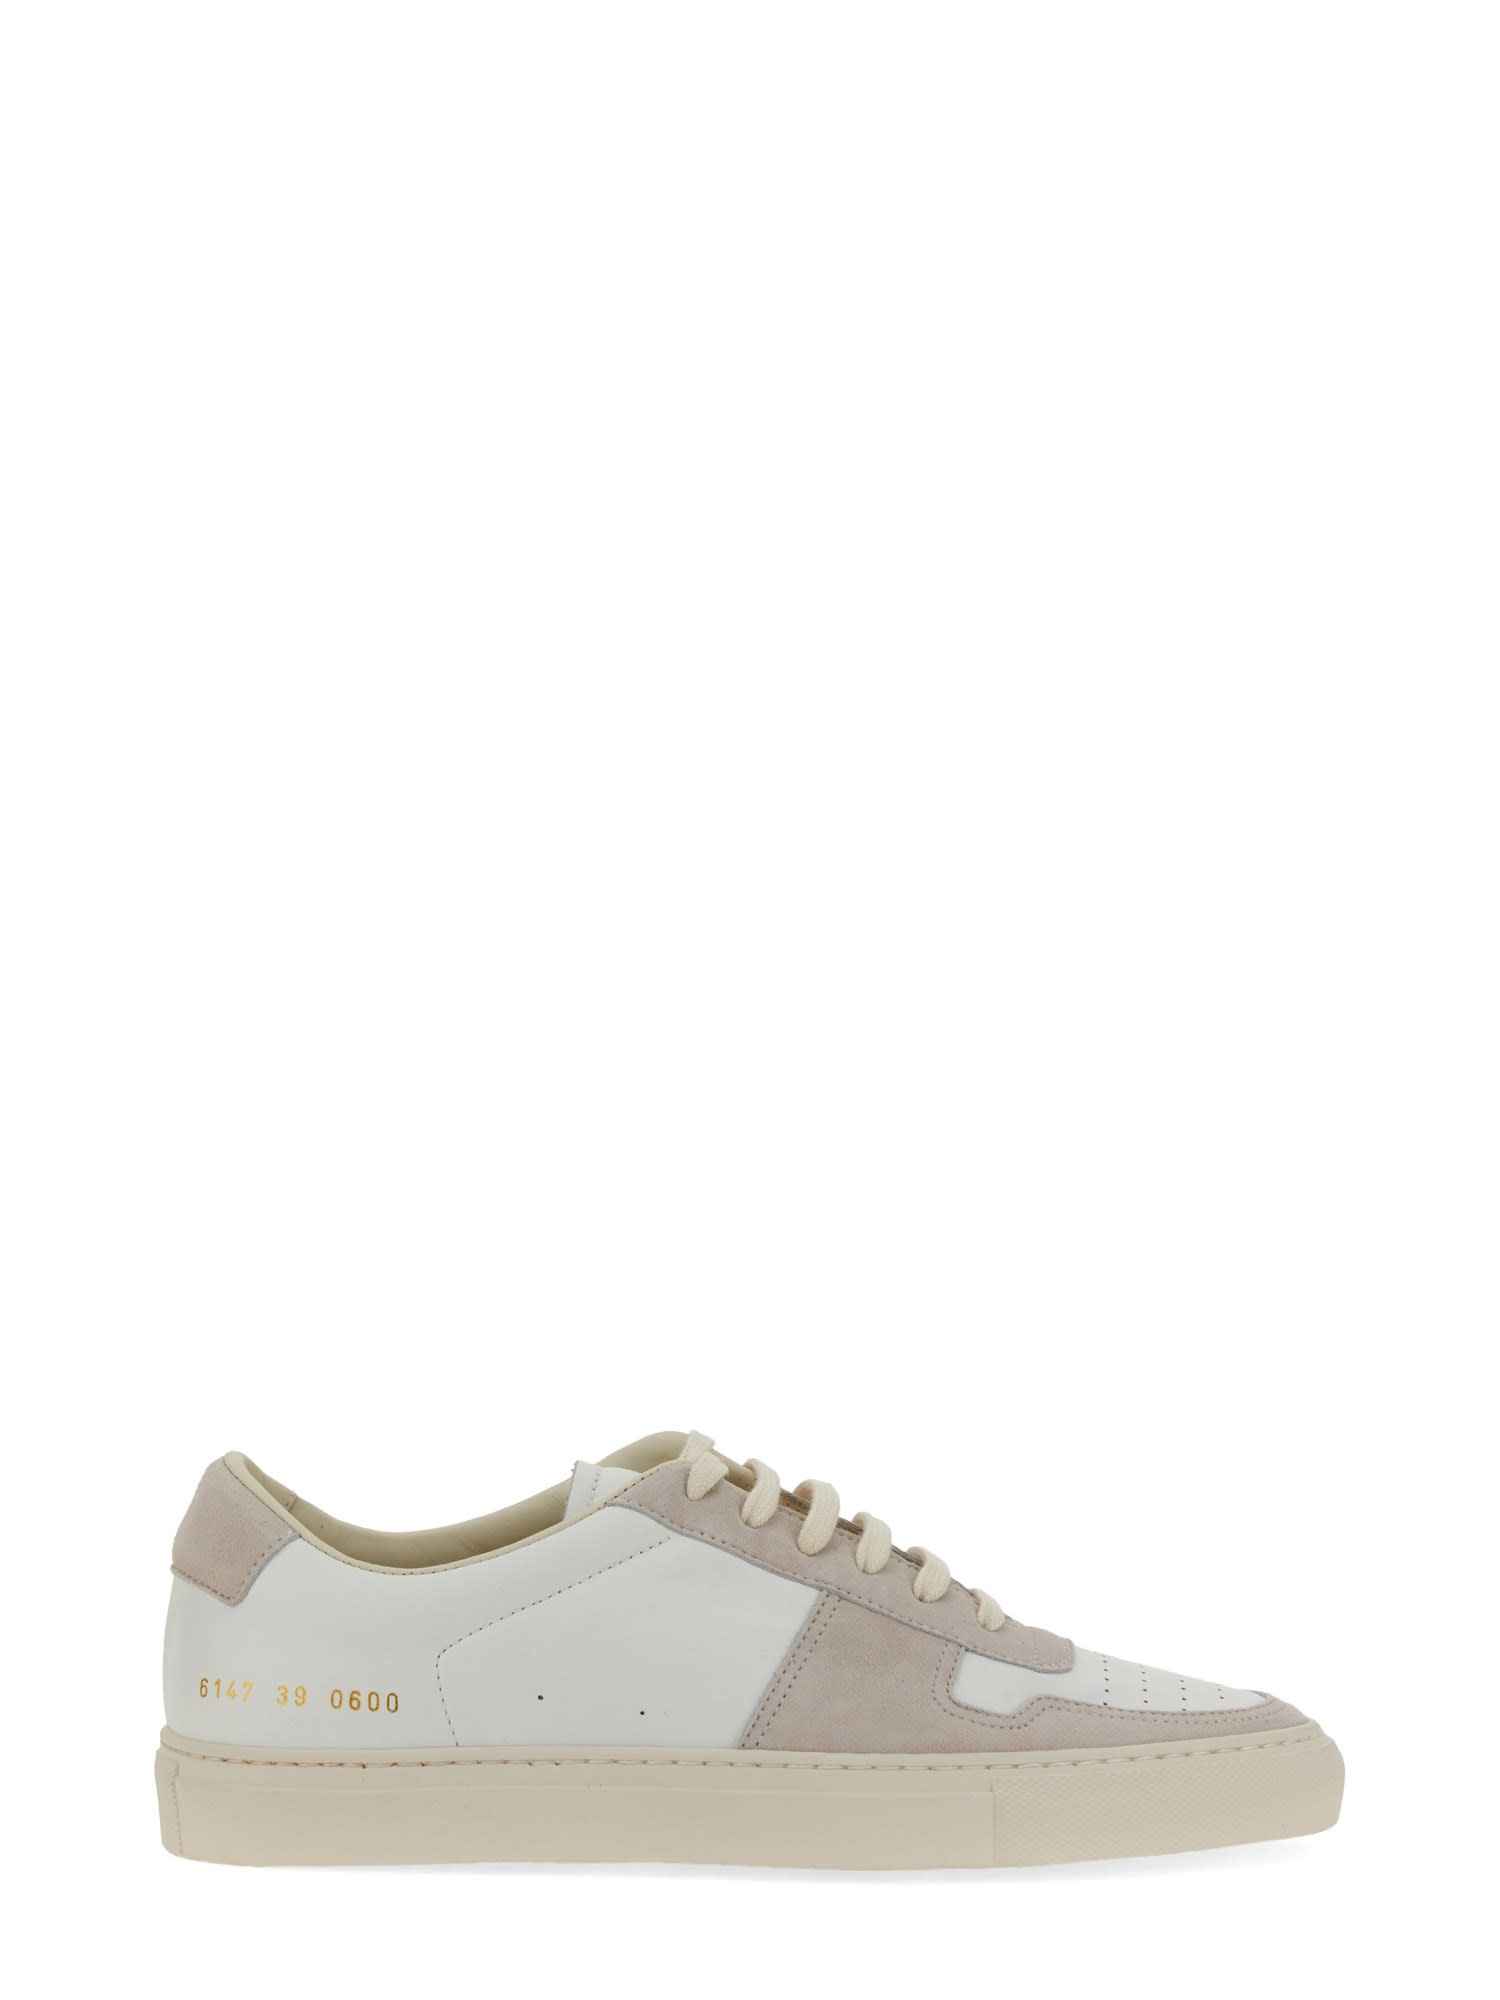 COMMON PROJECTS BBALL SNEAKER